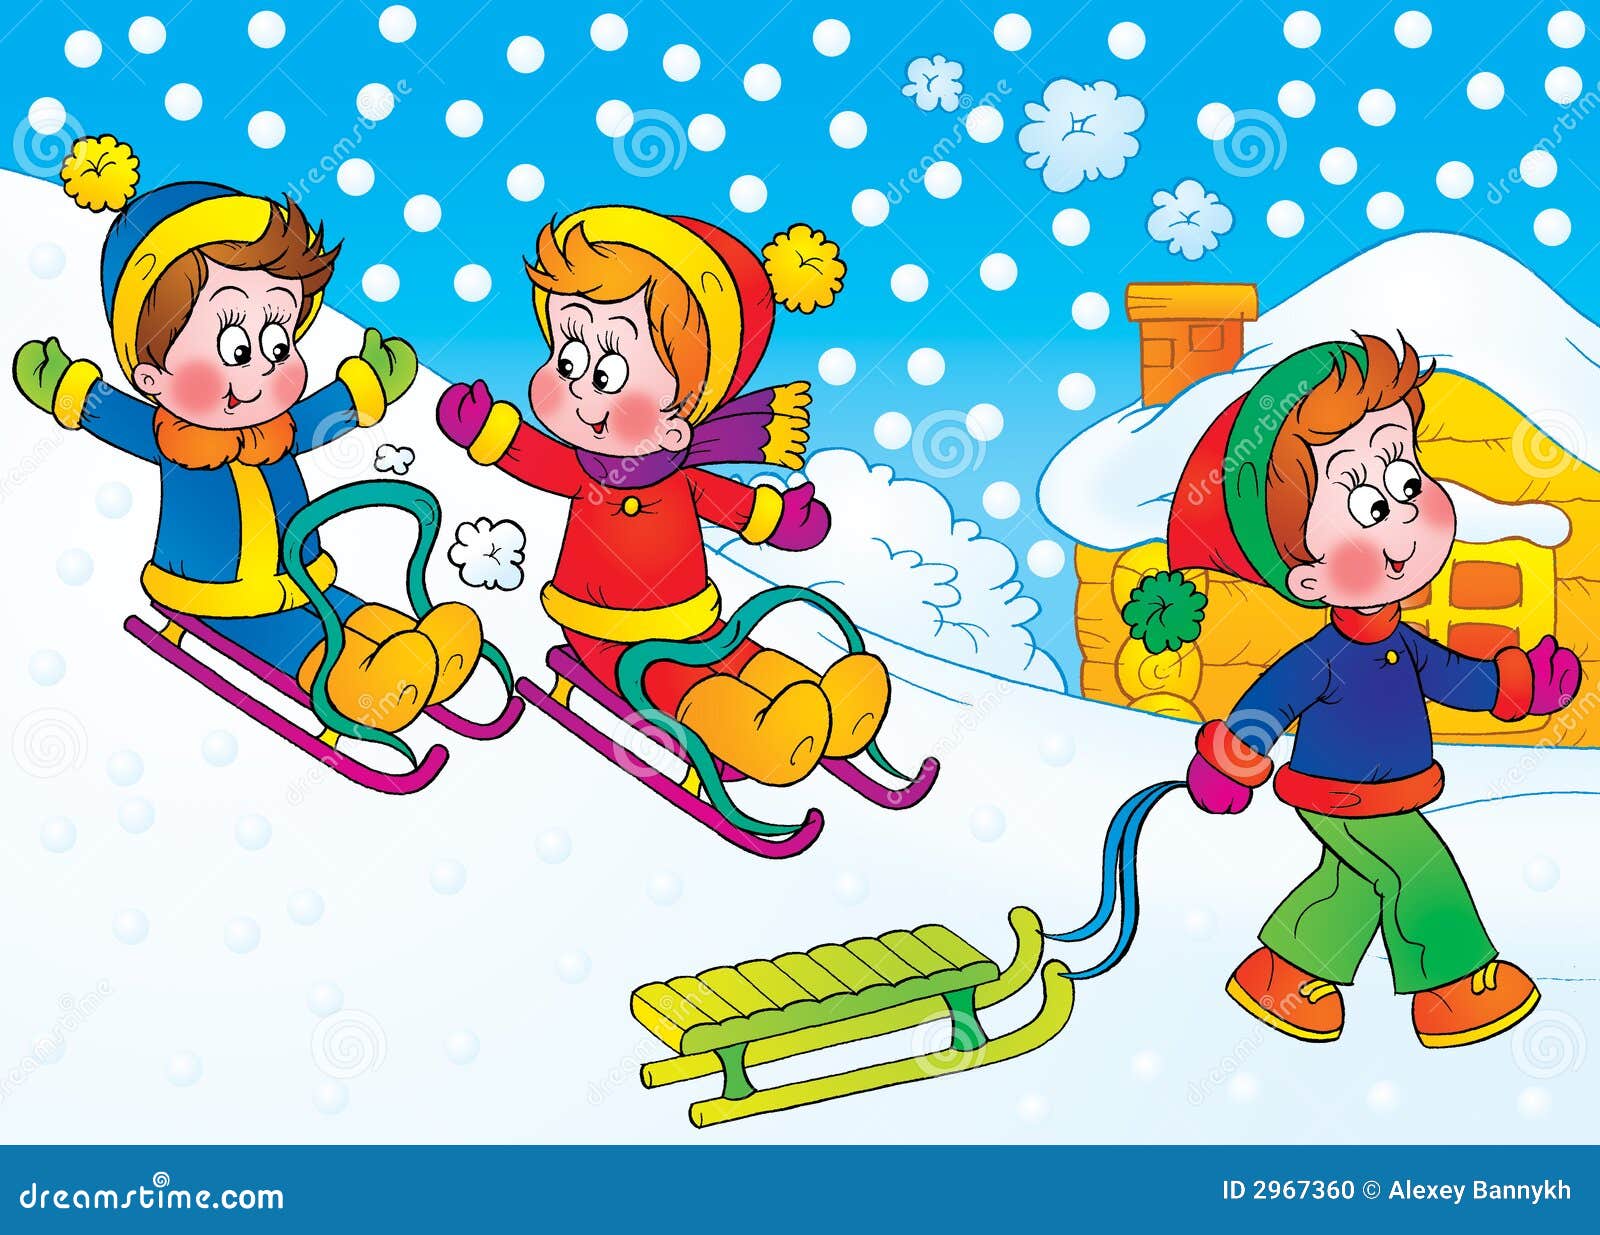 winter games clipart - photo #6